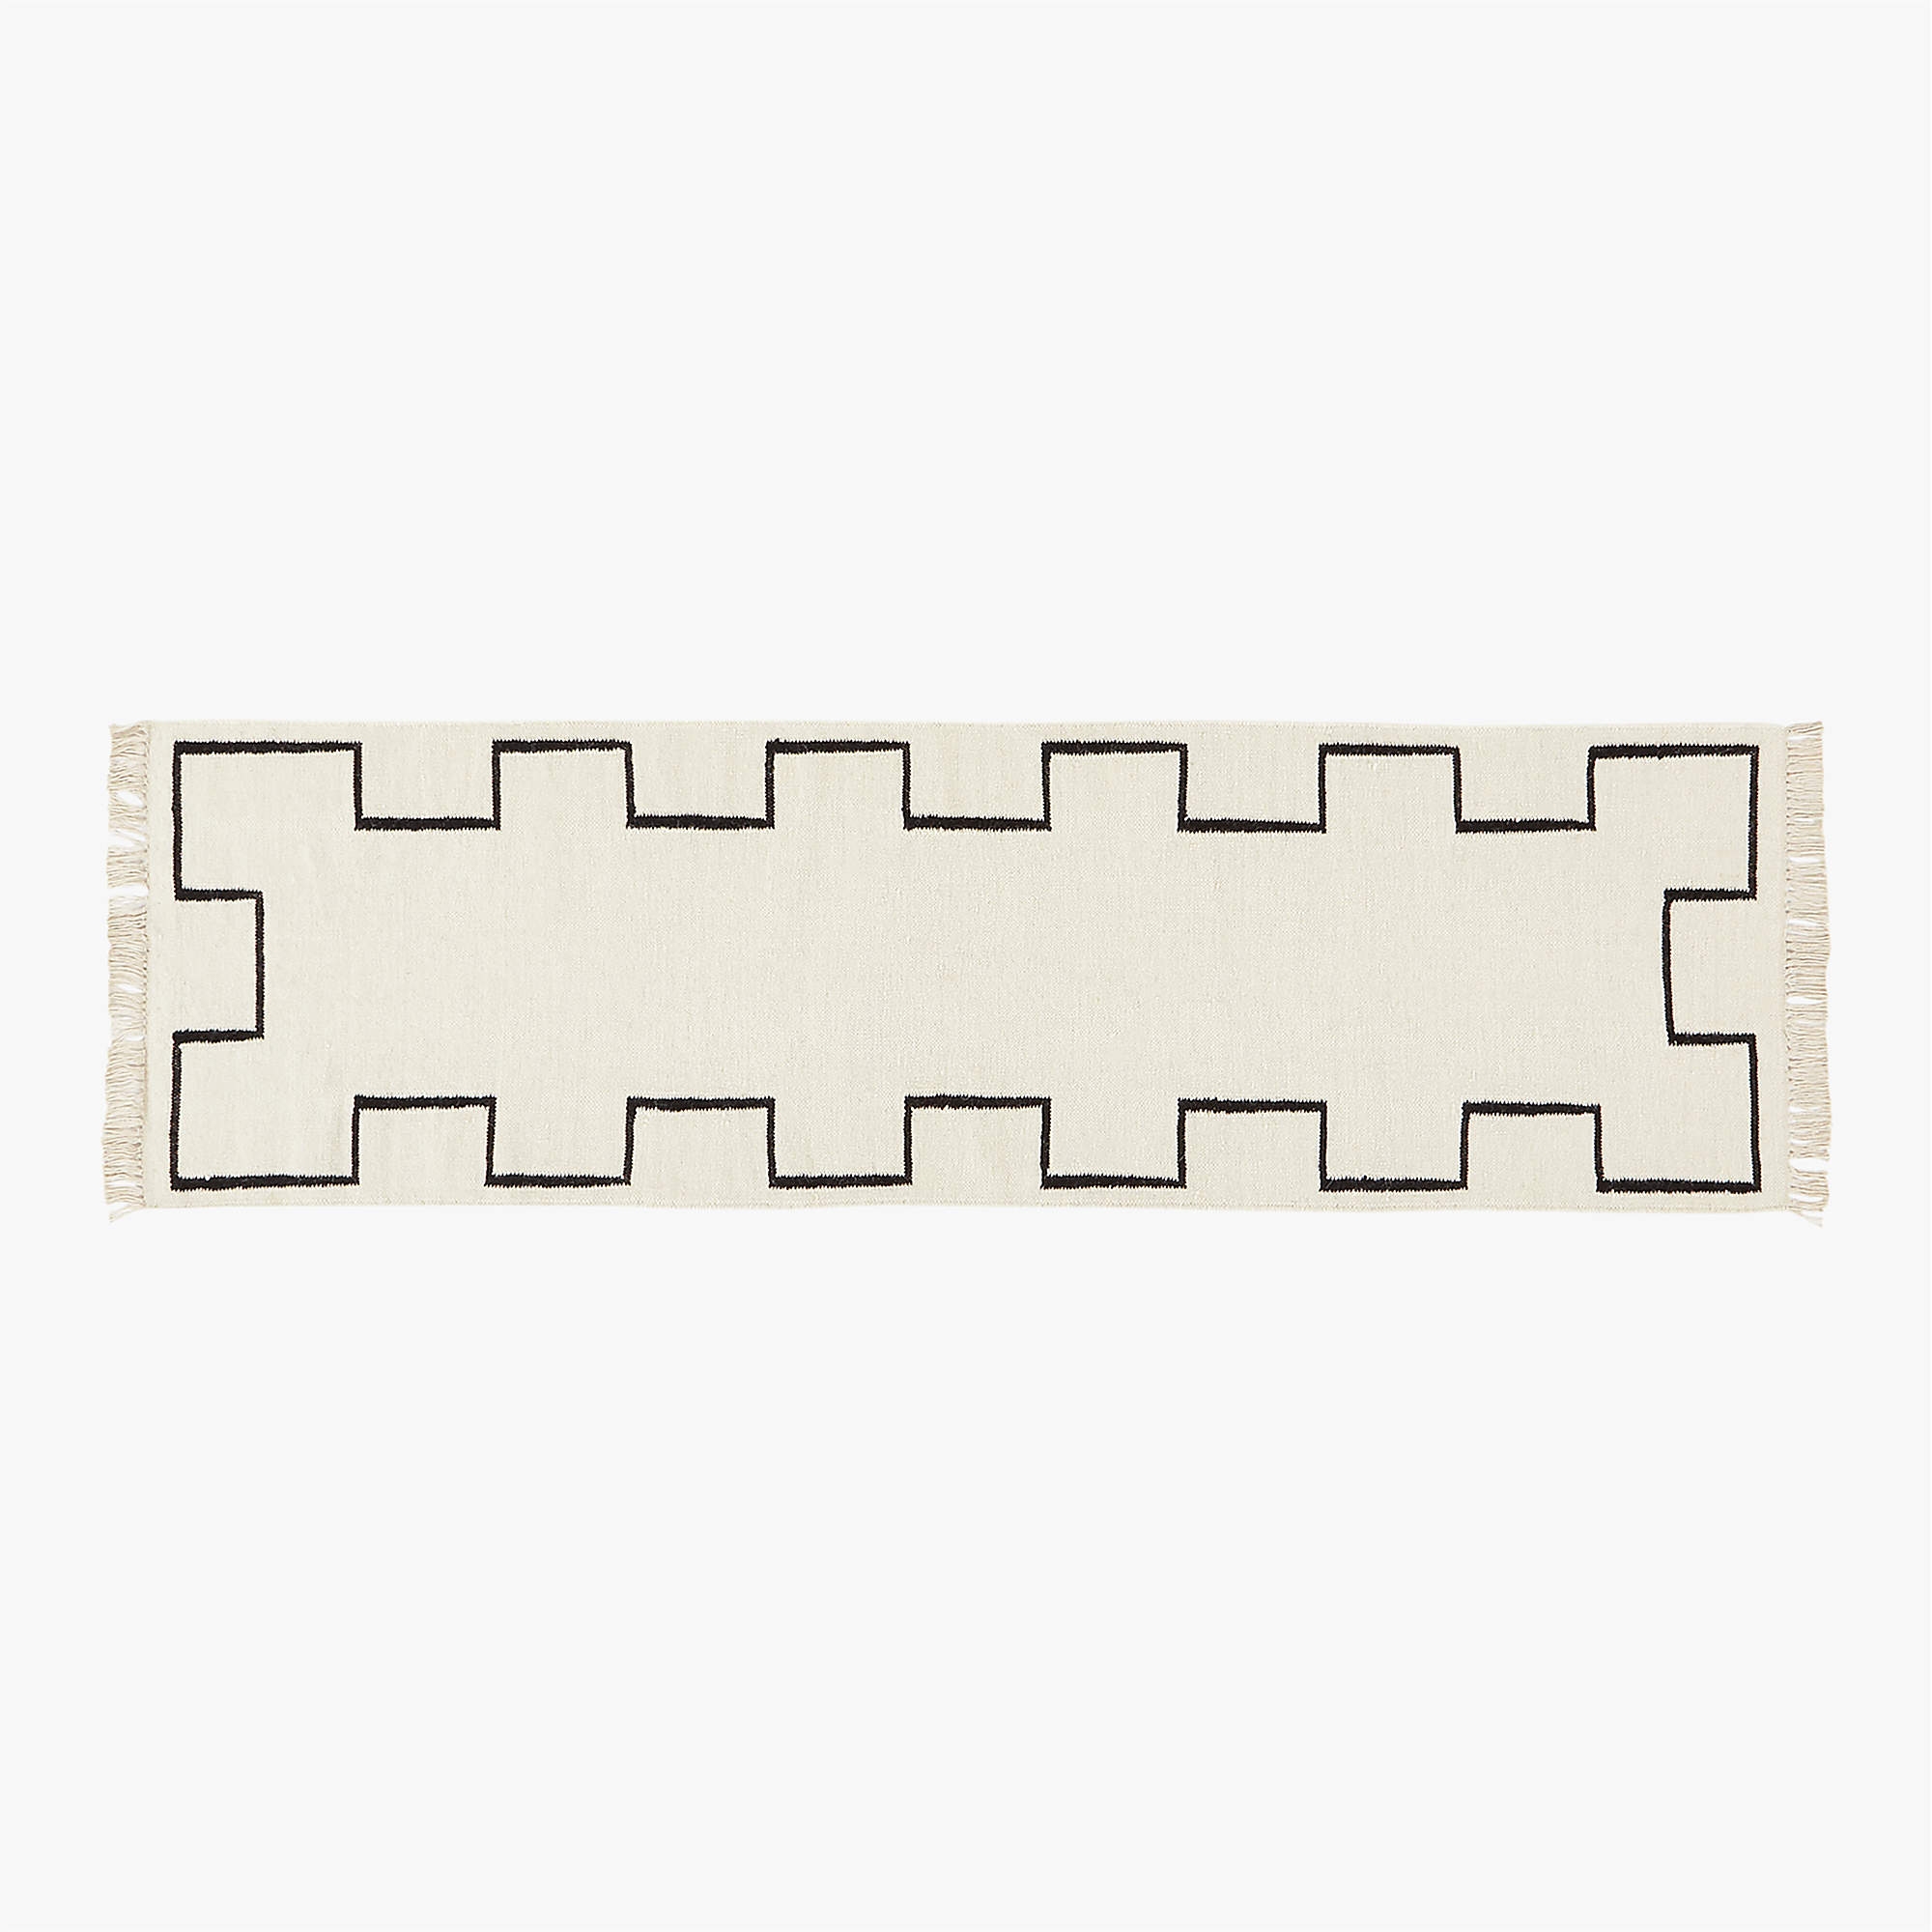 ZIYAD BORDERED HANDWOVEN IVORY AND BLACK DHURRIE RUNNER 2.5'X8' - Image 0